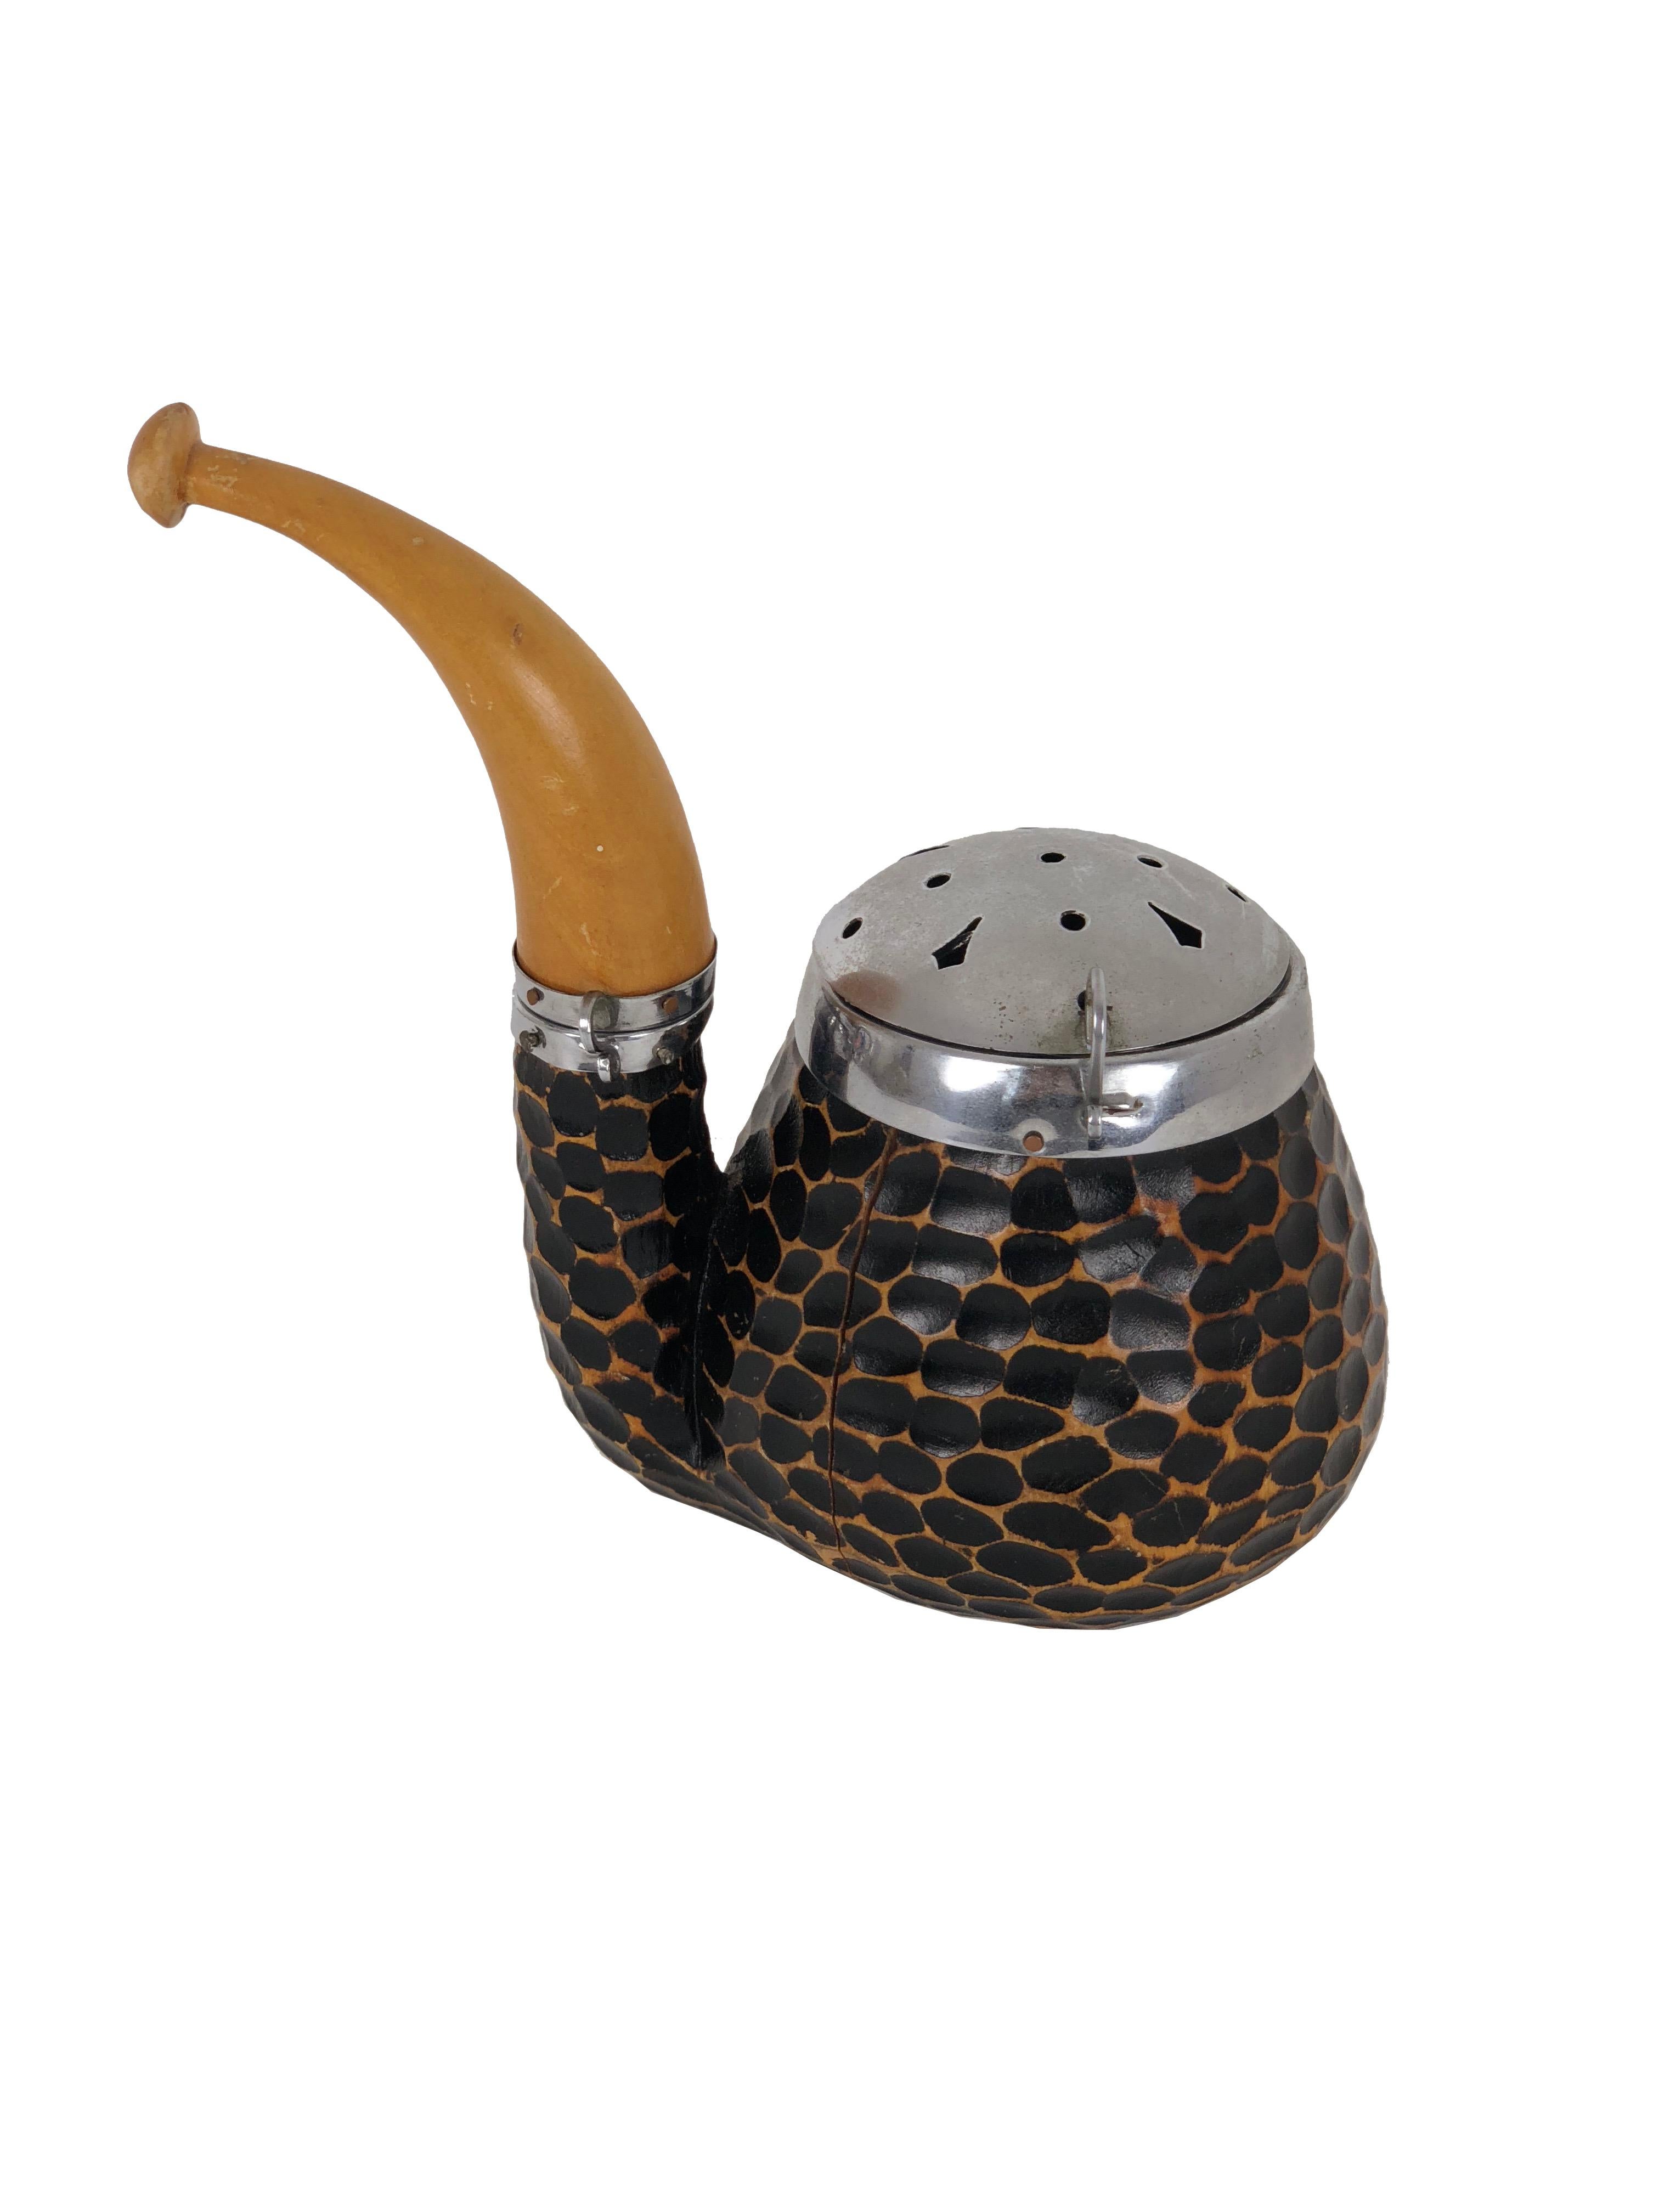 Tobacco container by Aldo Tura, Italy 1940s in brass and wood. The container has two compartments, one for storing tobacco and another for storing and lighting. As the photos show, the pipe as a cut on one side of the wooden 